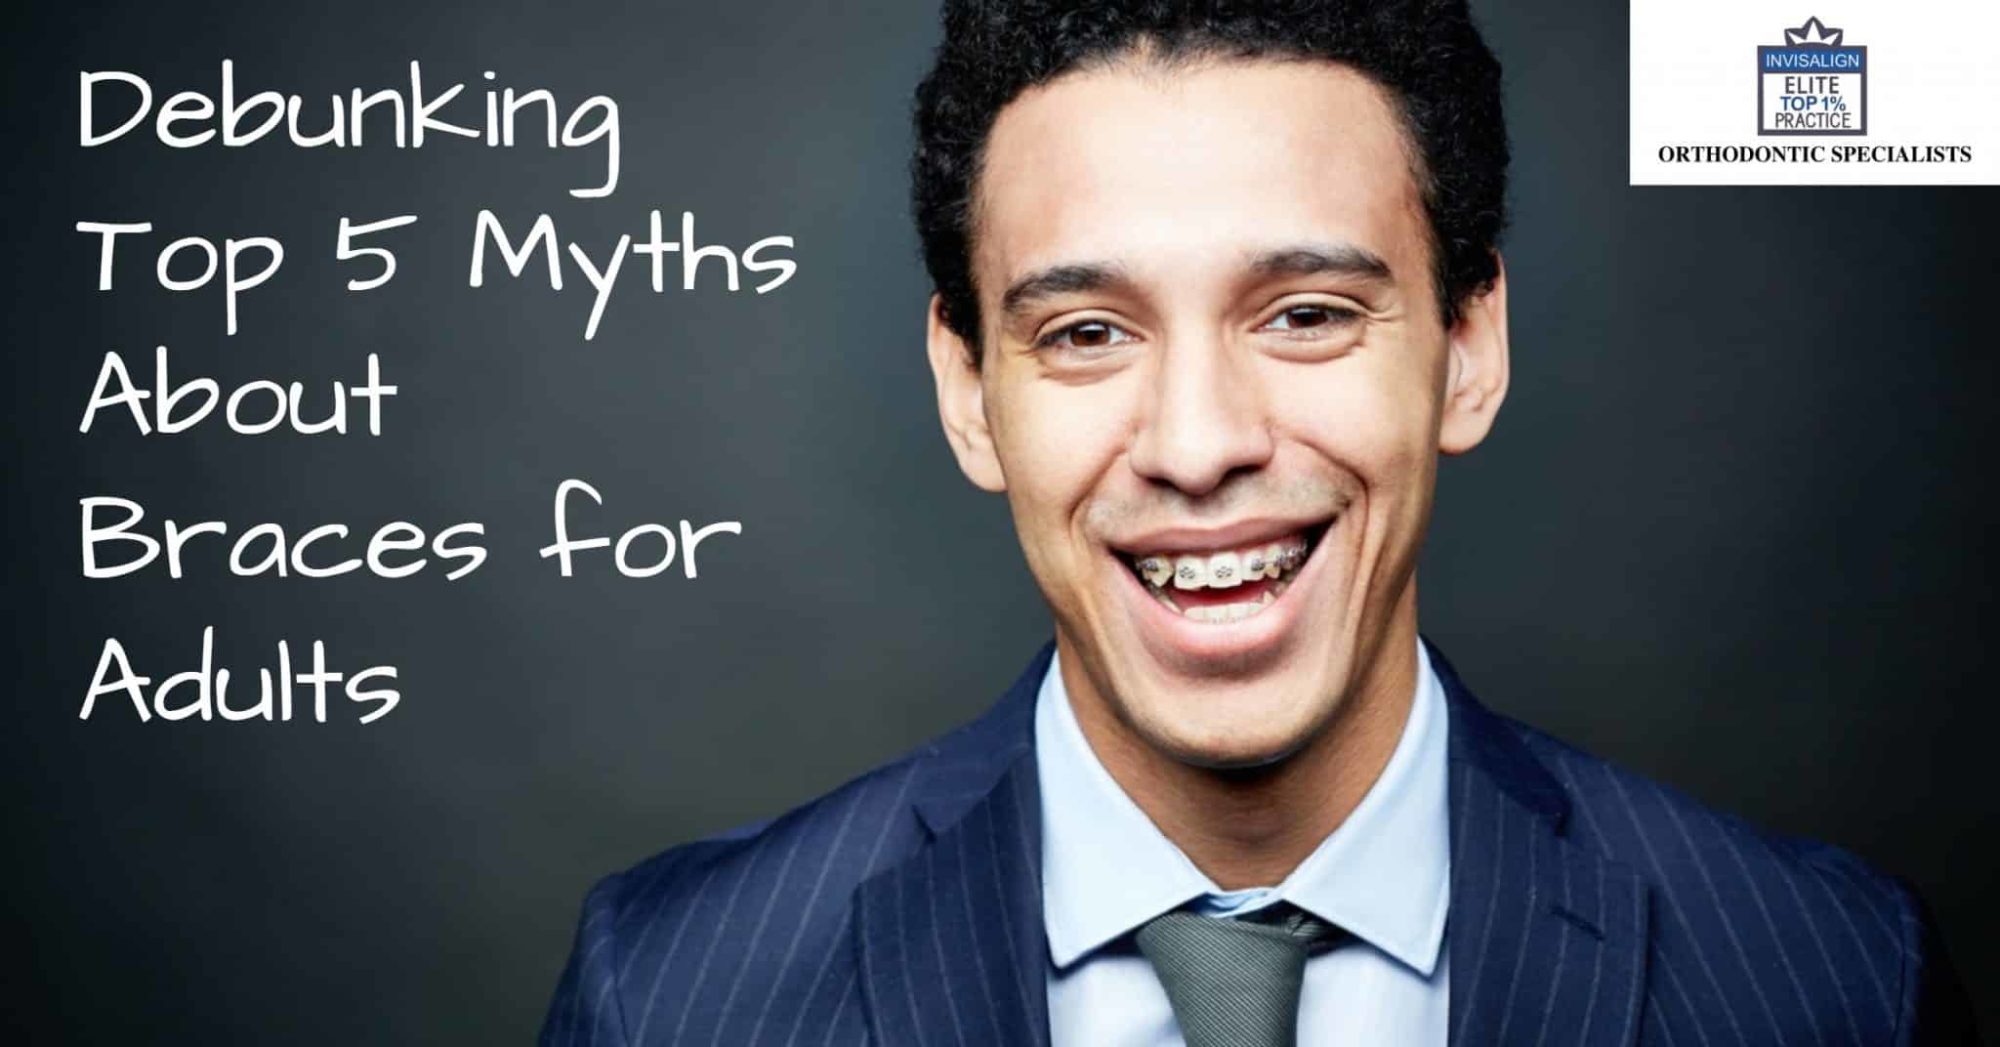 Top 5 Myths About Braces for Adults